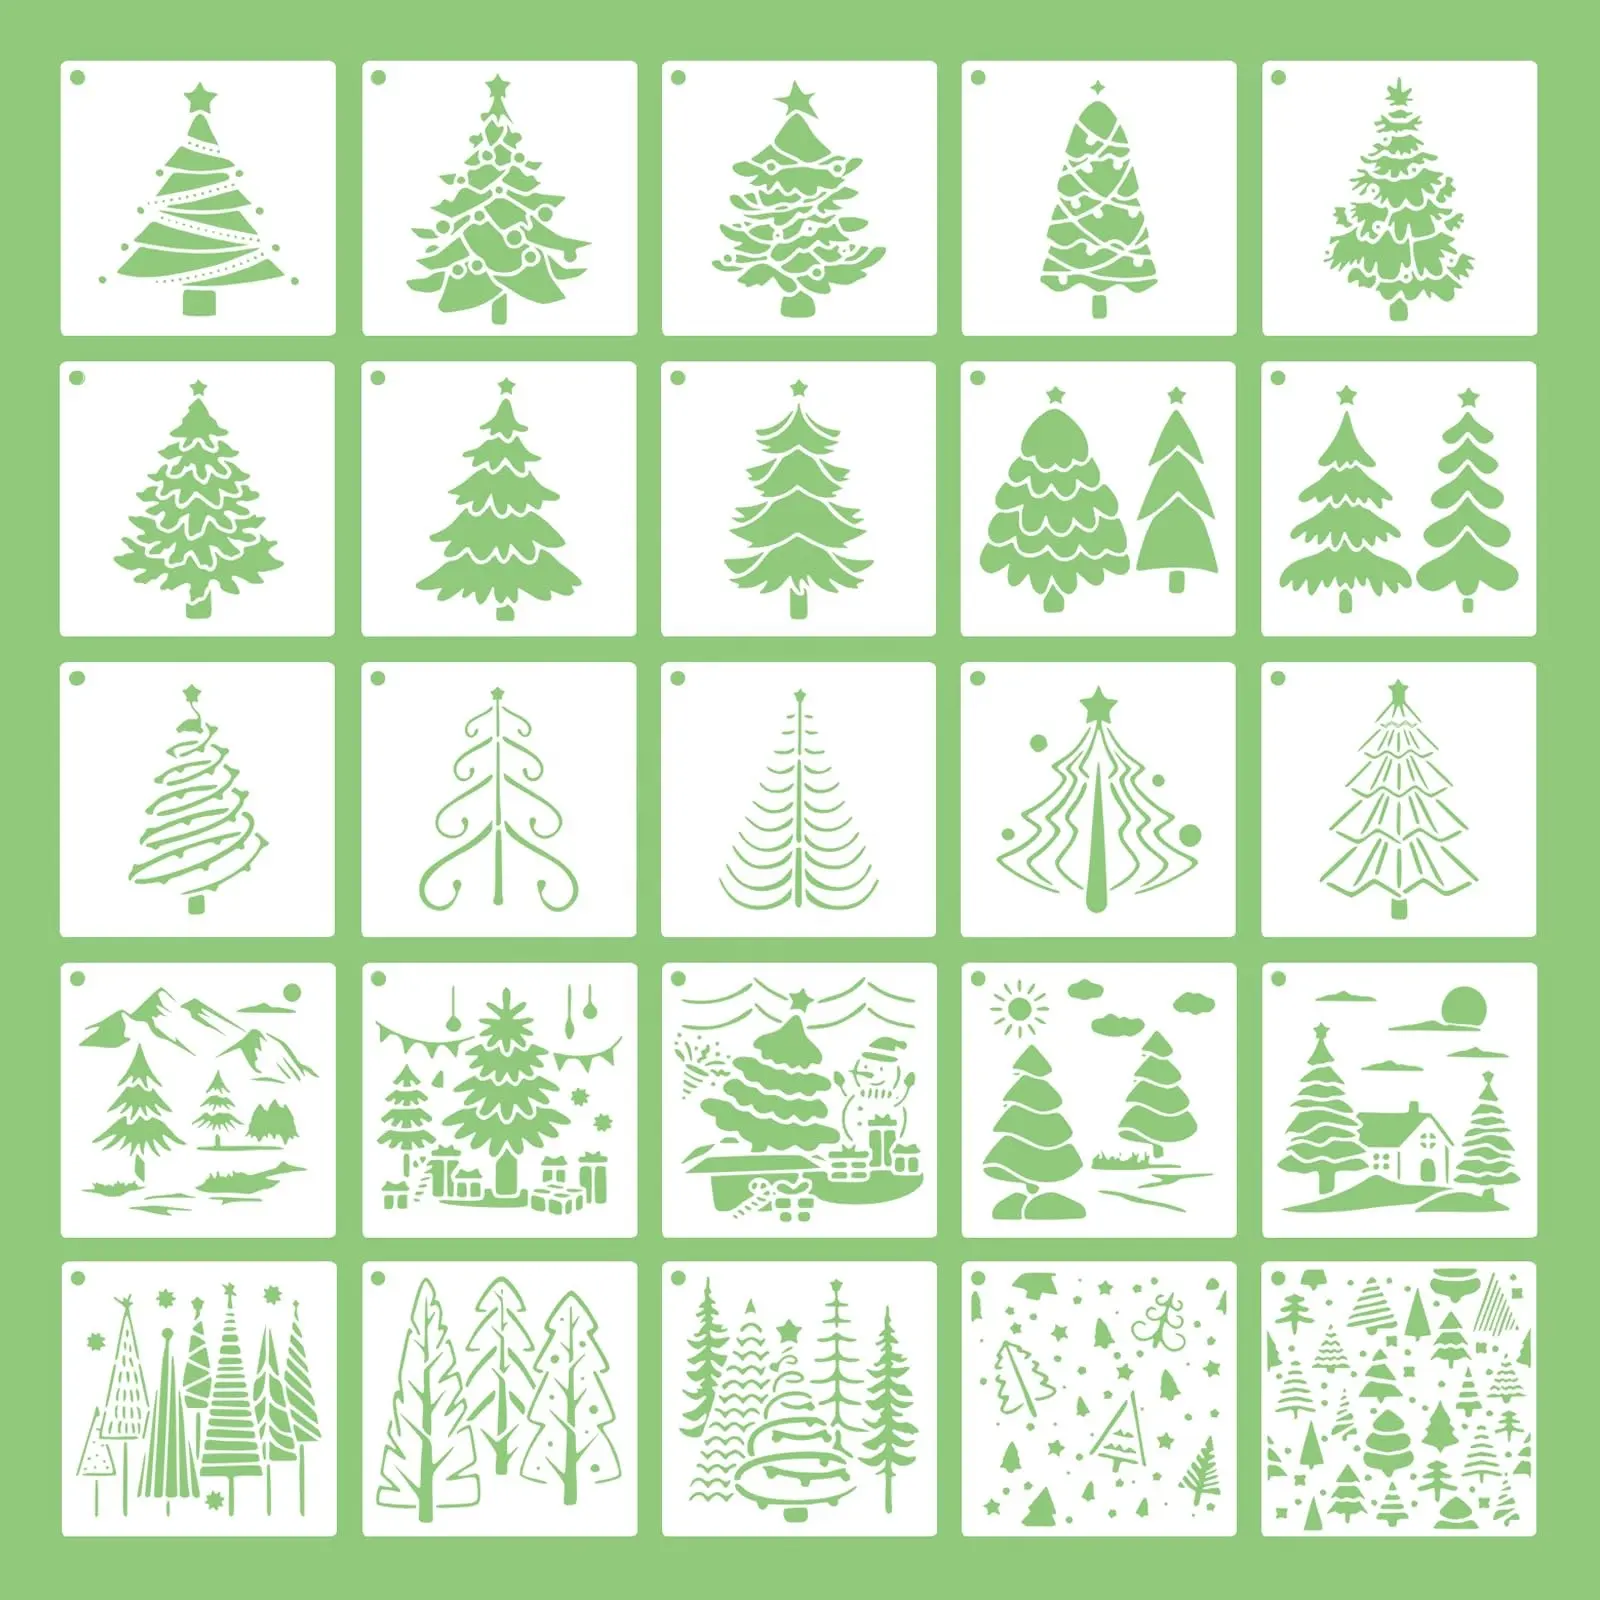 25pcs Pine Tree Stencils Set 4 x 4 Inches Small Christmas Trees Templates for Painting on Wood Wall Home Decor